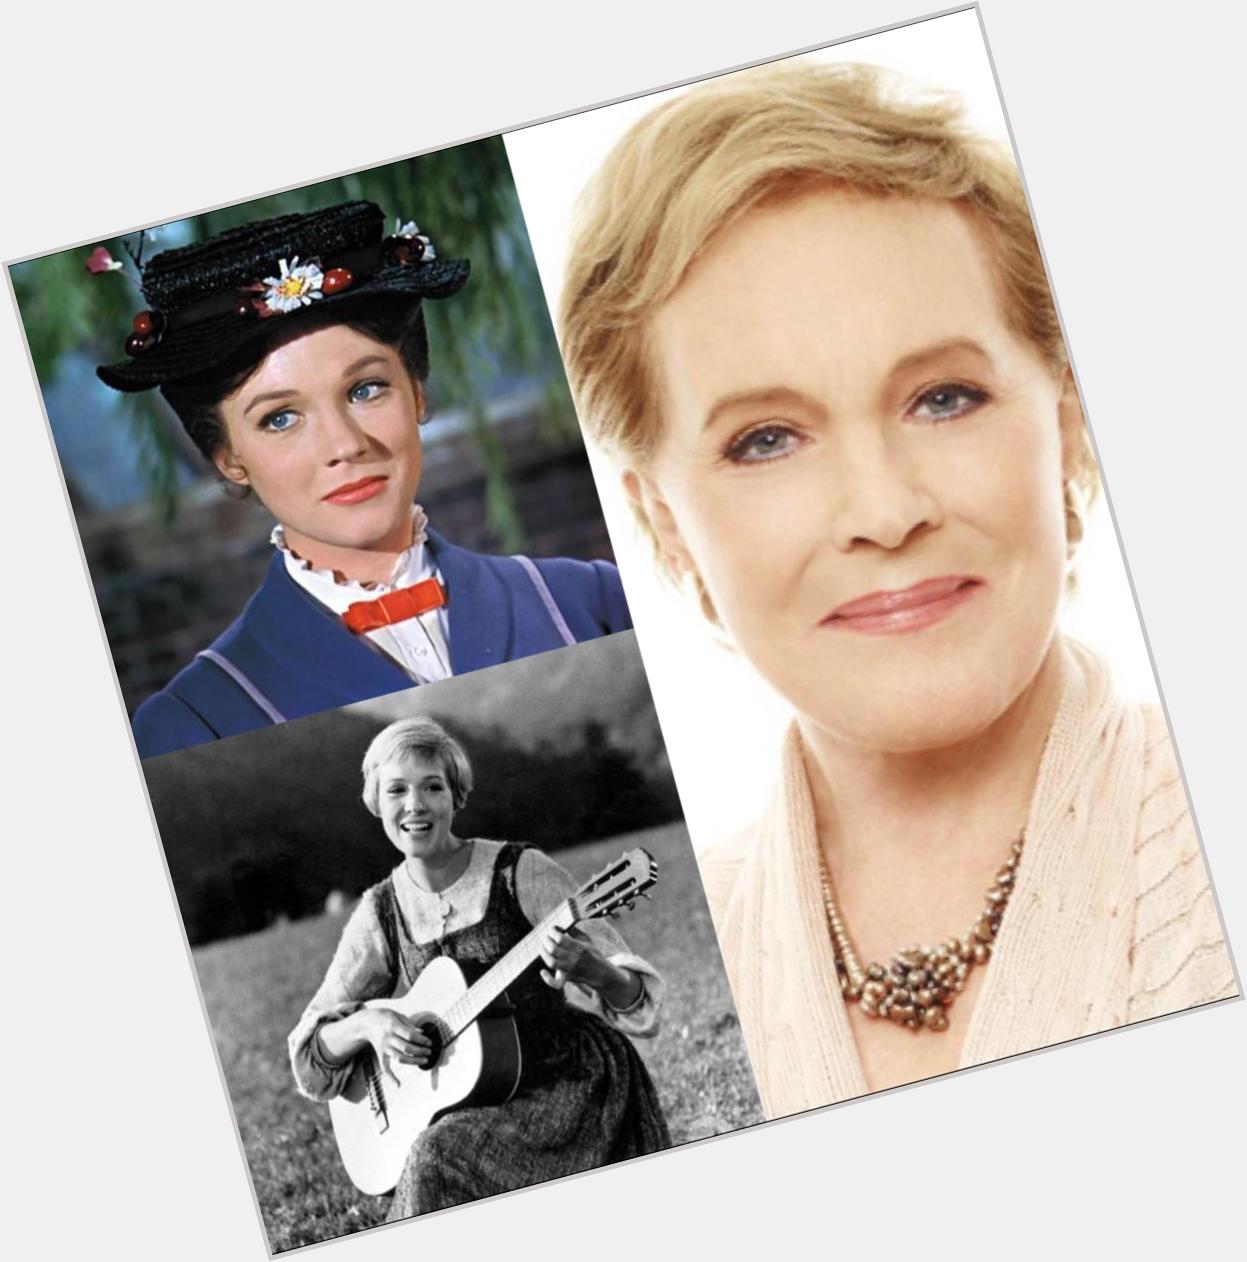 Happy Birthday to the best Mary Poppins to ever grace screen or stage:
Dame Julie Andrews!  